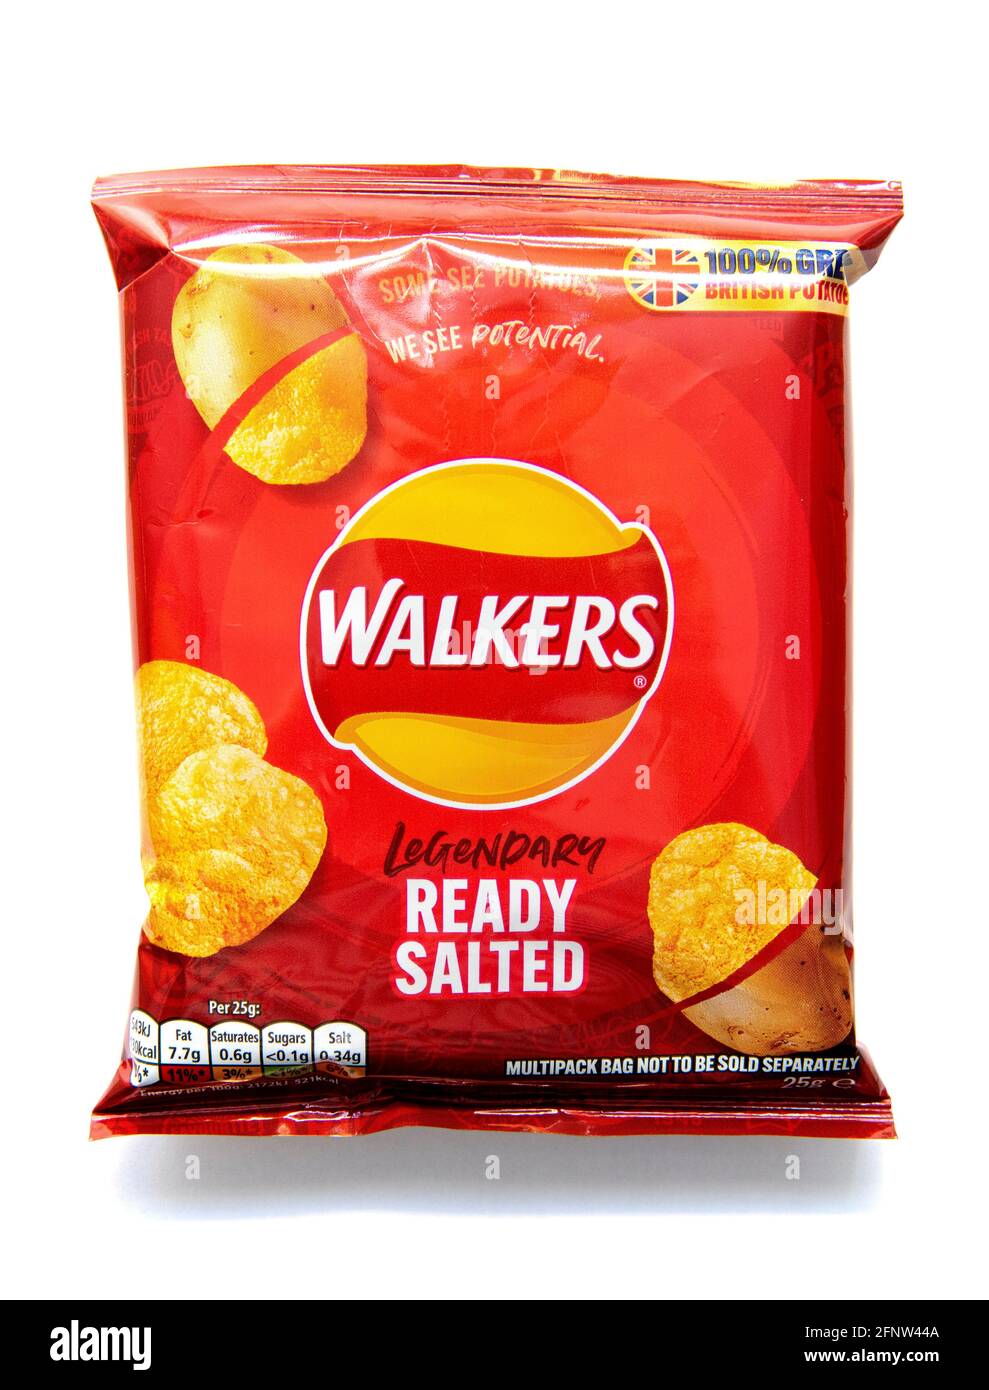 A packet of Walkers legendary ready salted potato crisps on a white background Stock Photo